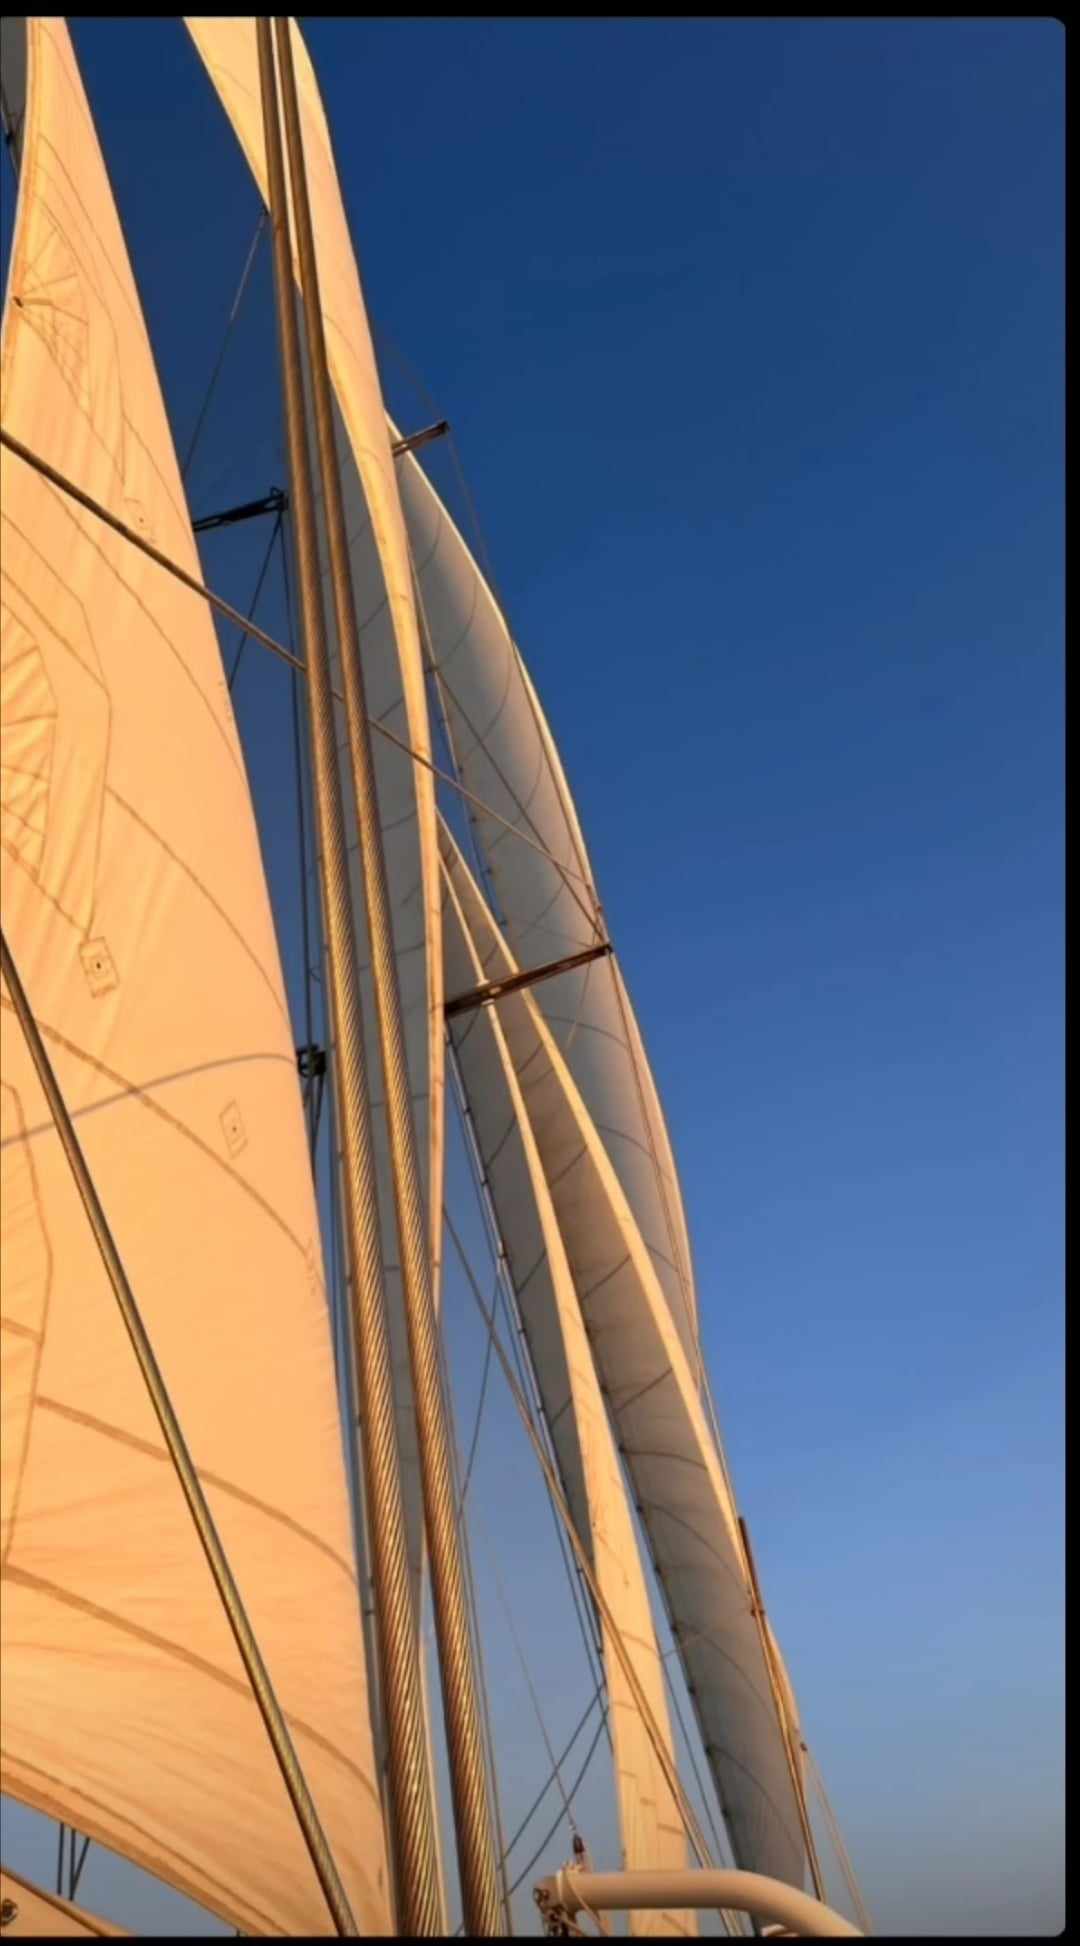 All the 6 sails up!